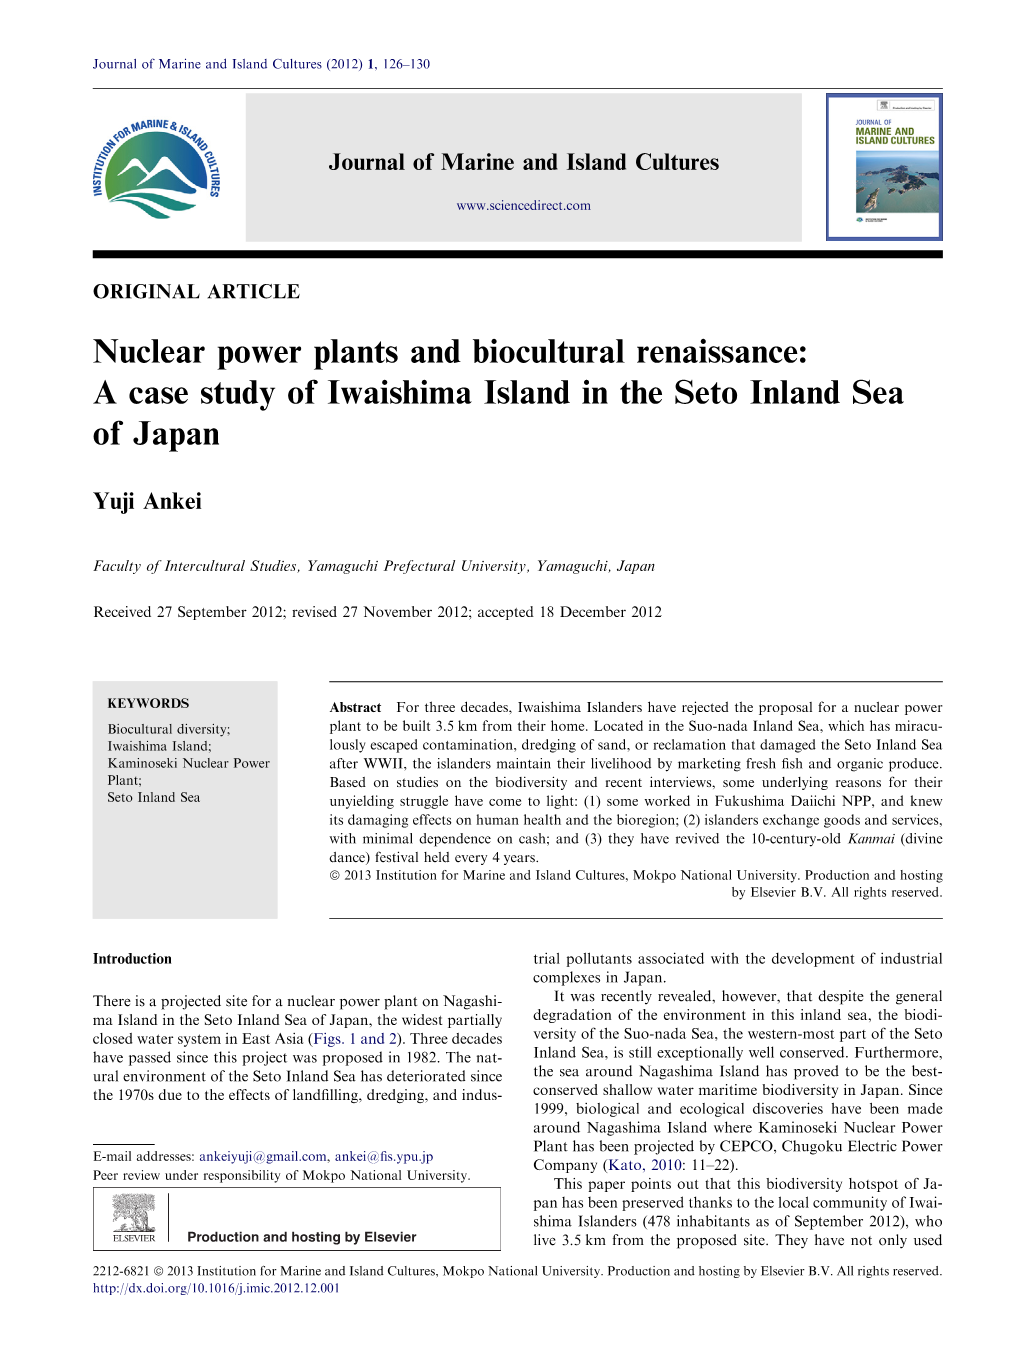 Nuclear Power Plants and Biocultural Renaissance: a Case Study of Iwaishima Island in the Seto Inland Sea of Japan